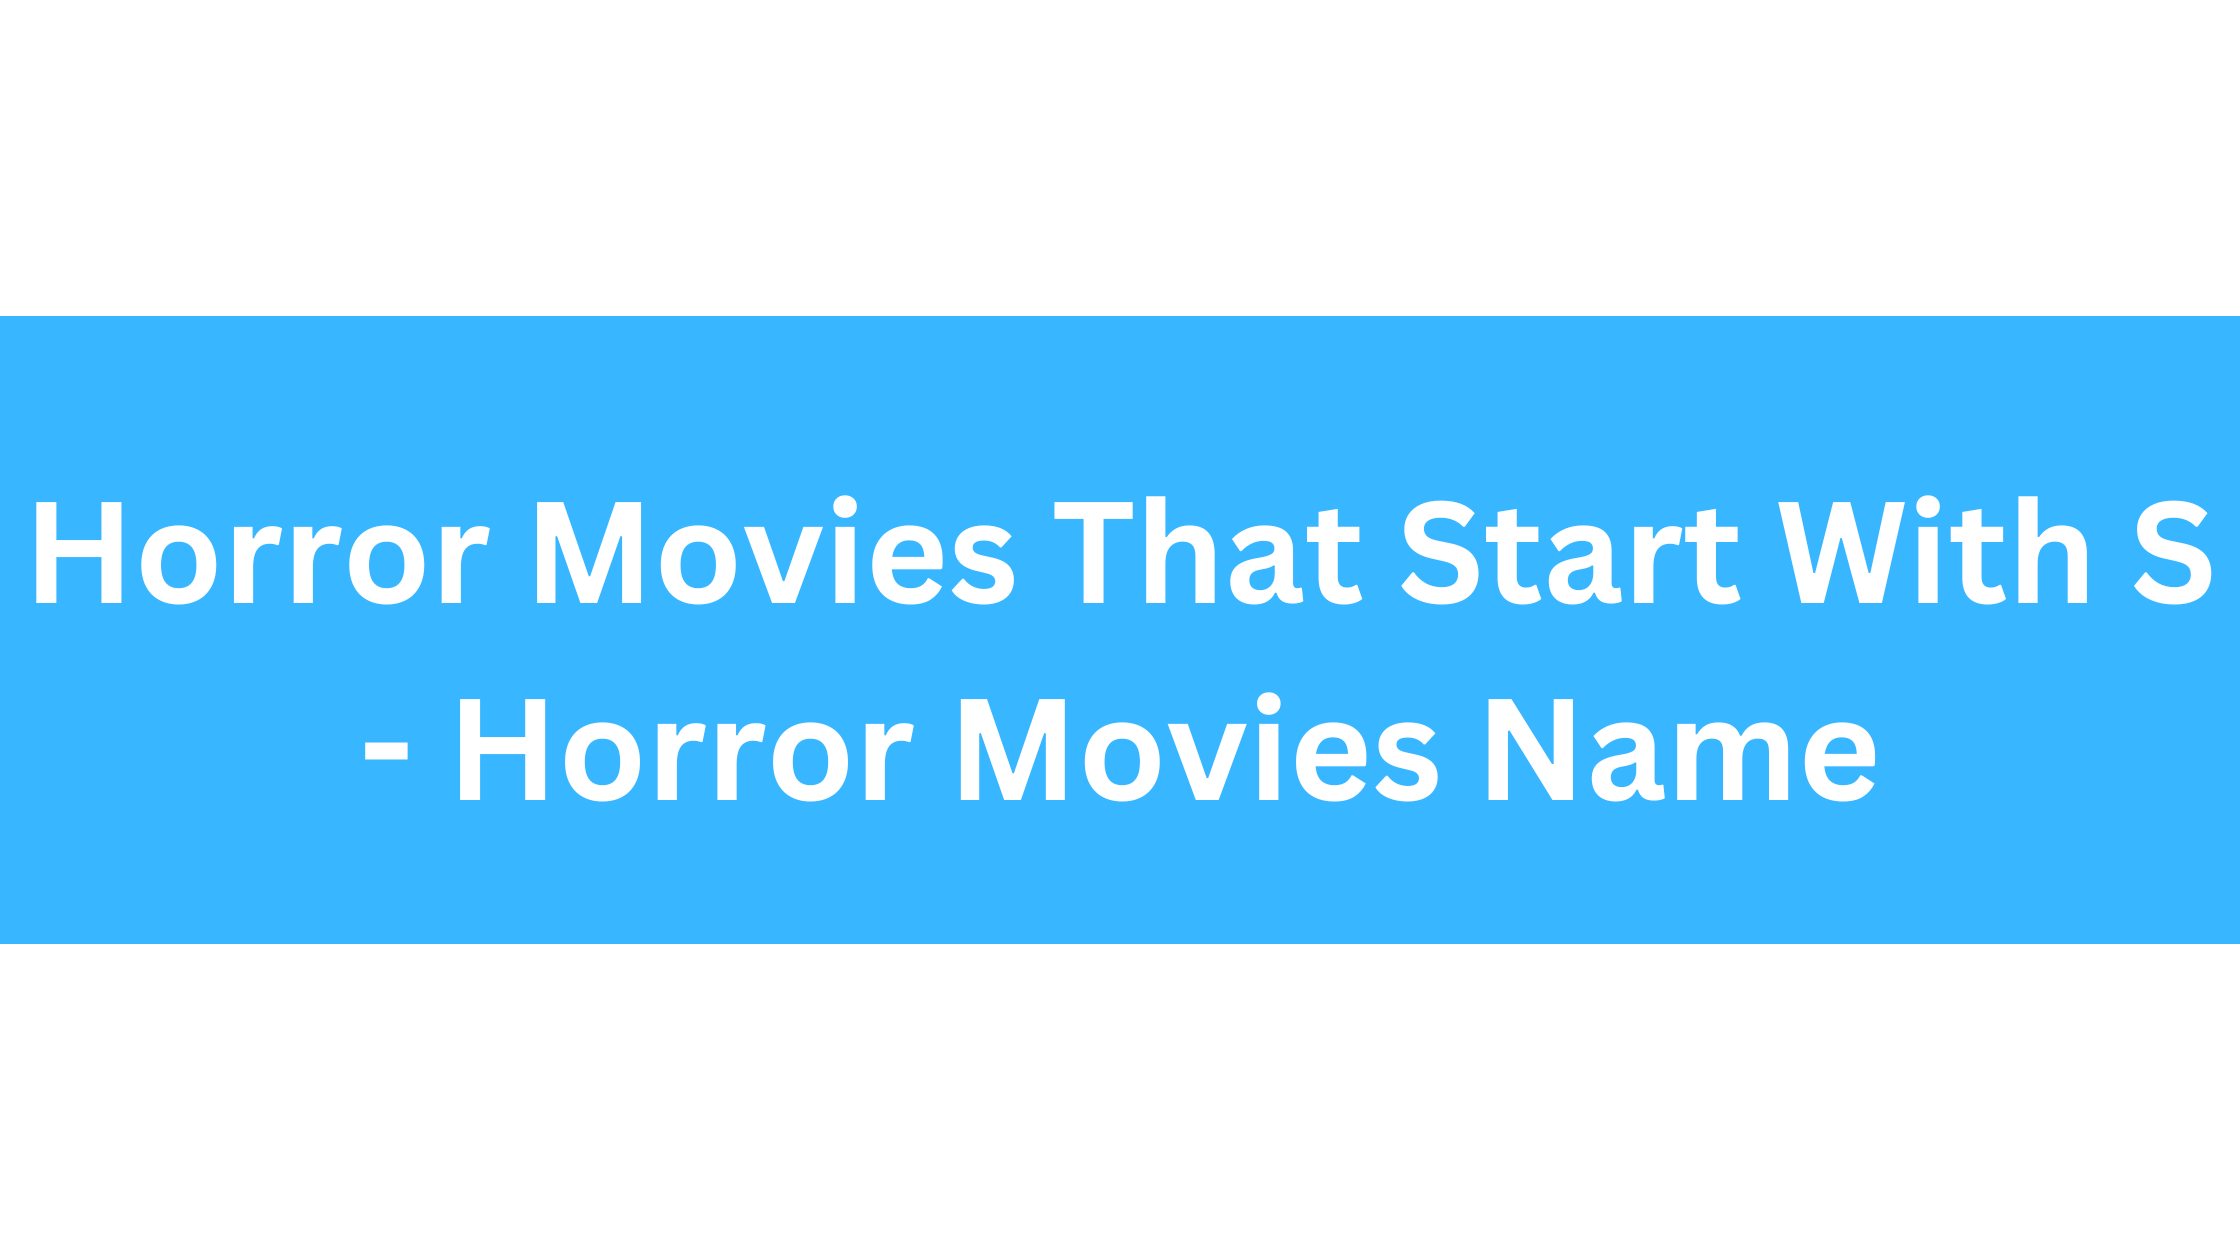 Horror Movies That Start With S